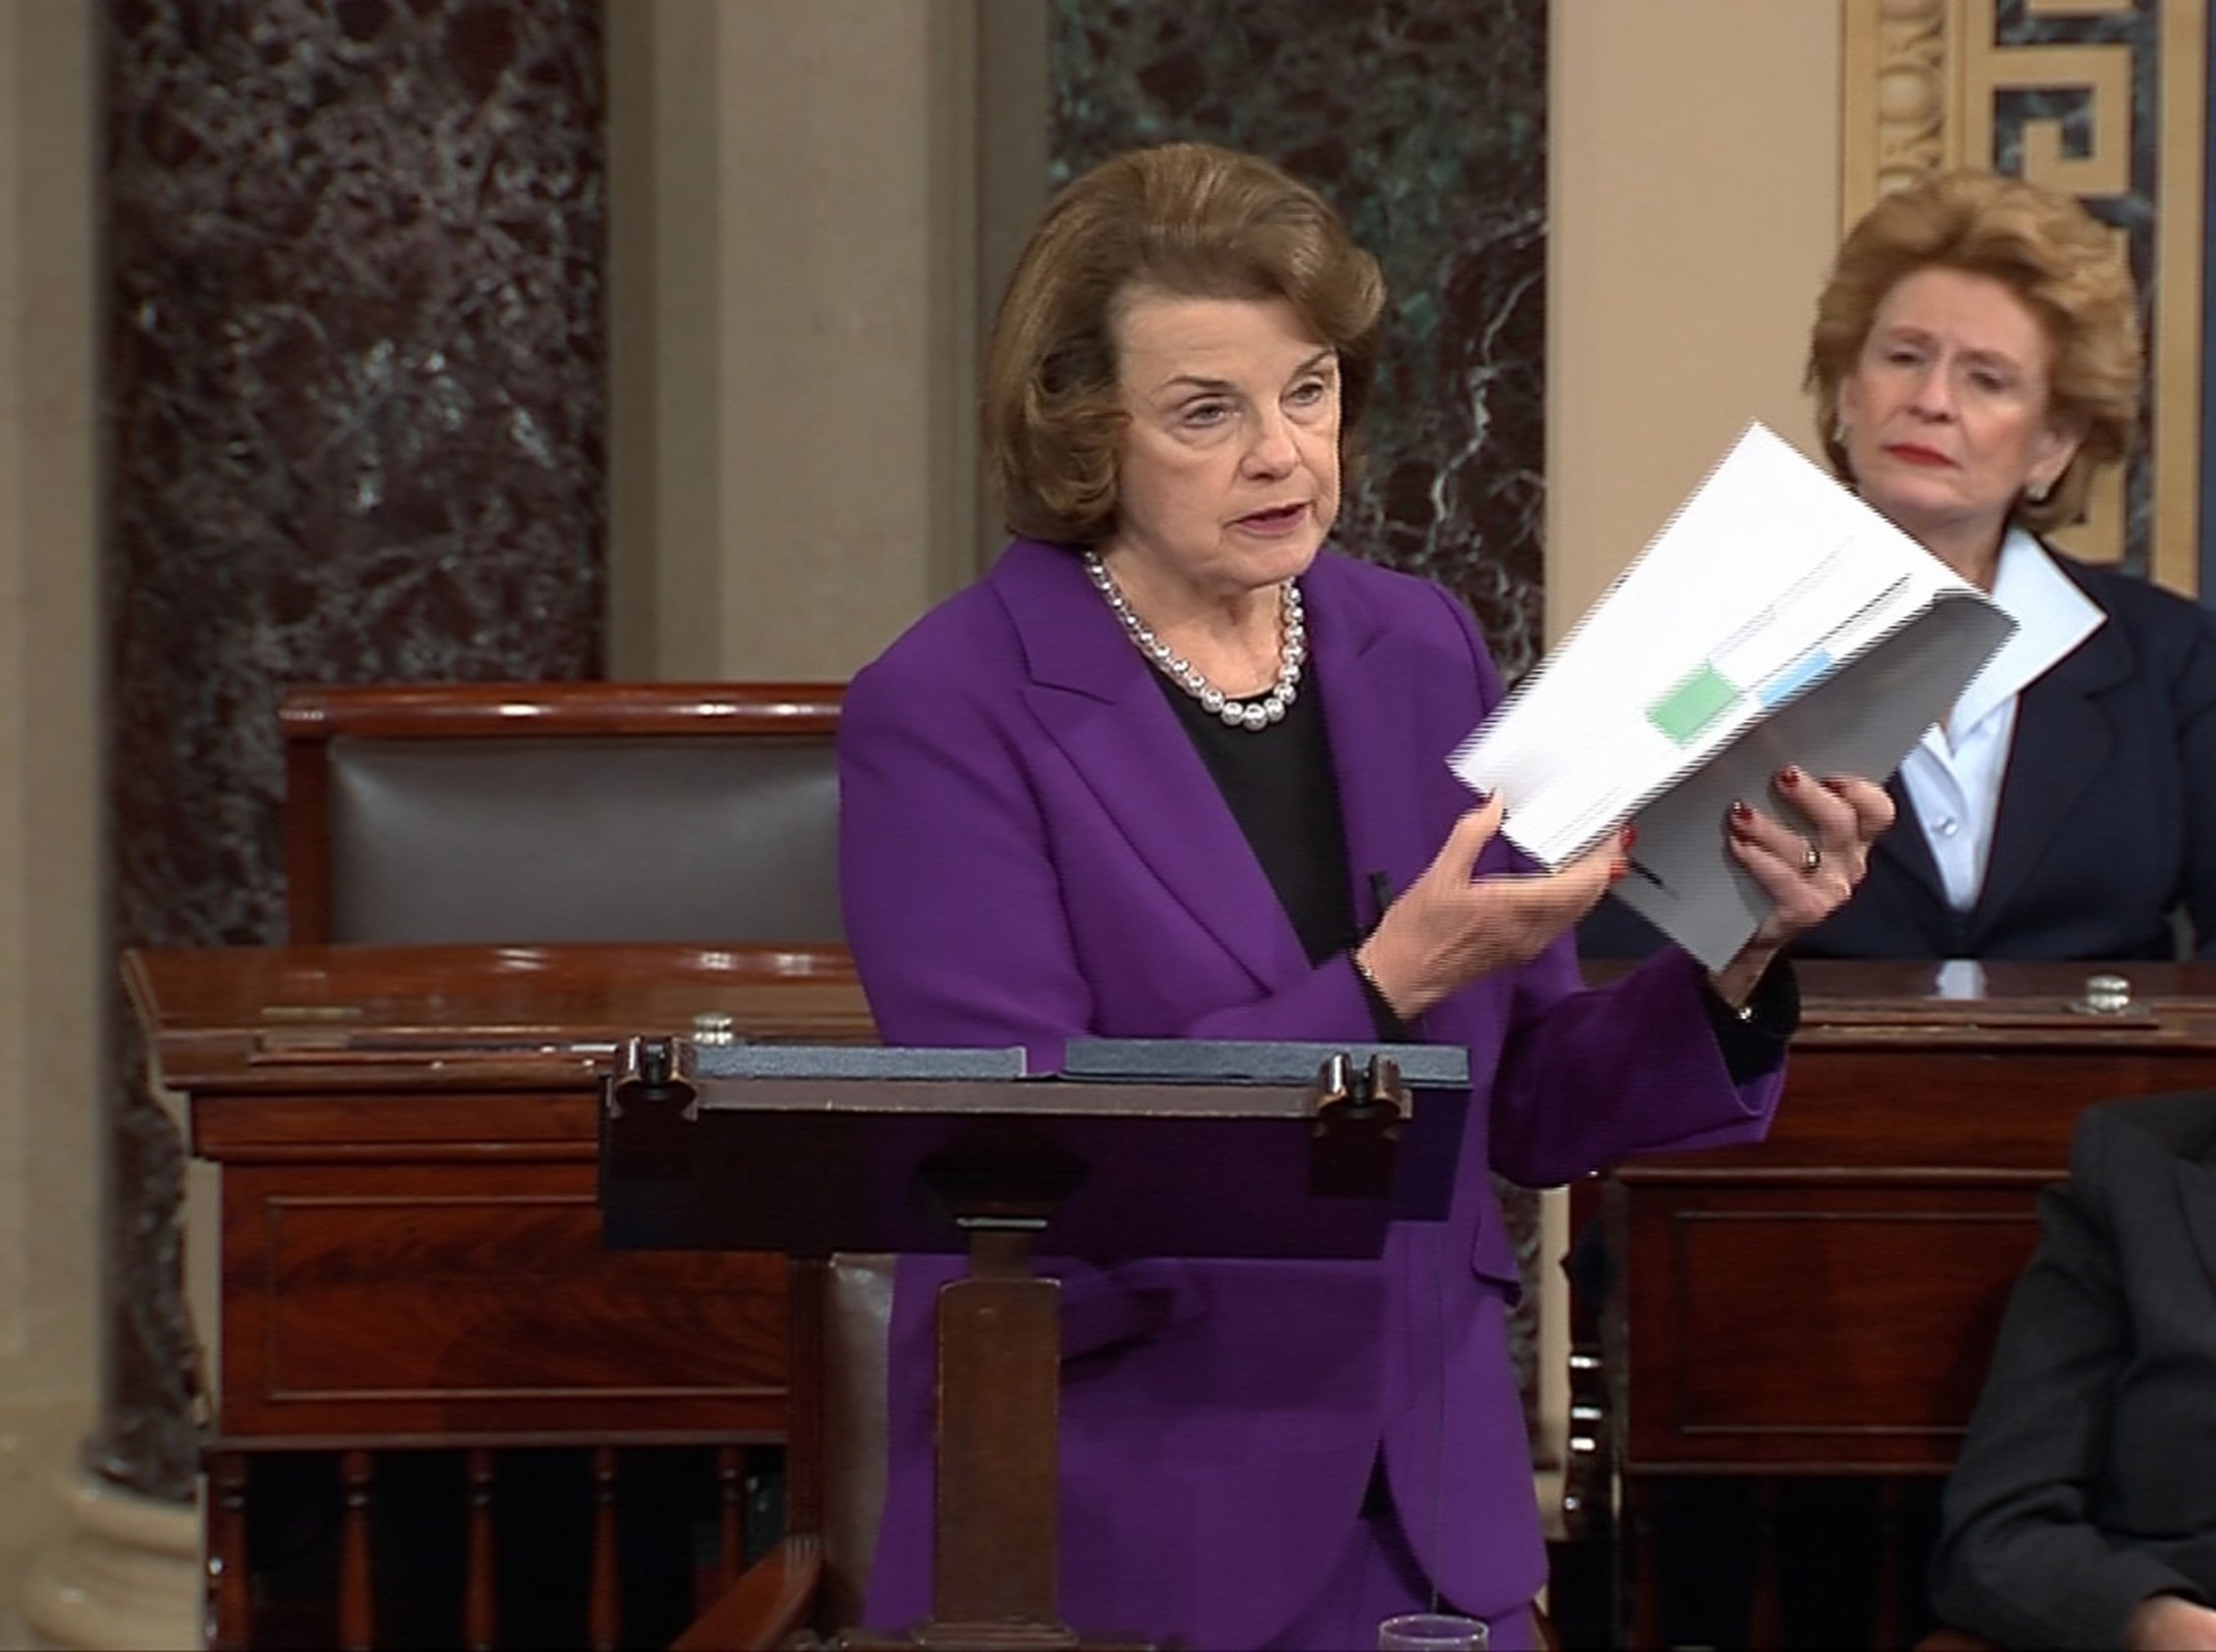 Senate Intelligence Committee Chairwoman Dianne Feinstein discusses a newly released Intelligence Committee report on the CIA's anti-terrorism tactics, in a speech on the floor of the U.S. Senate on Capitol Hill in Washington on Dec. 9, 2014. (Reuters)